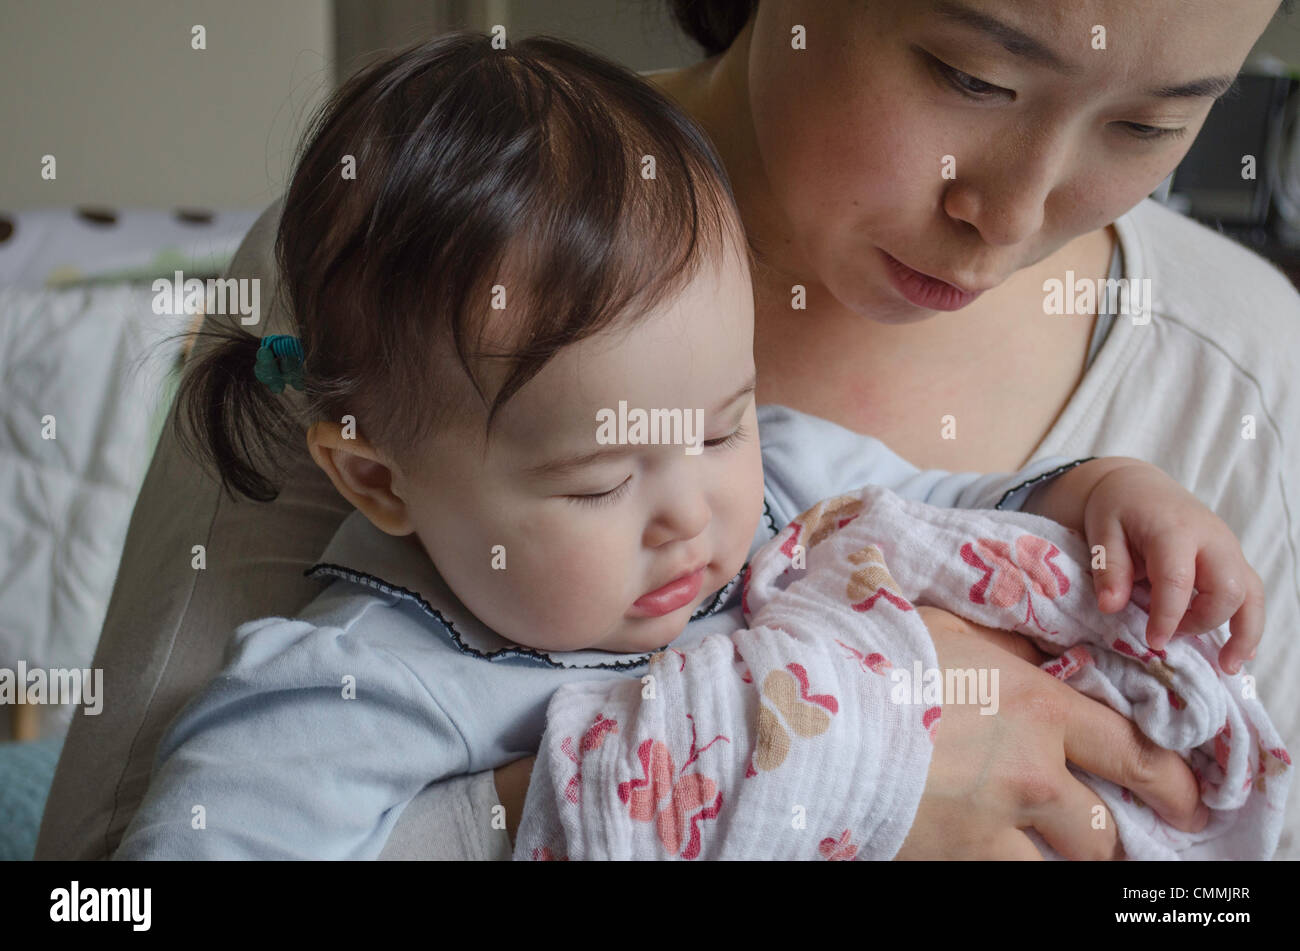 Cute mixed Asian (Korean) Caucasian baby girl being held by her Korean mother. Stock Photo